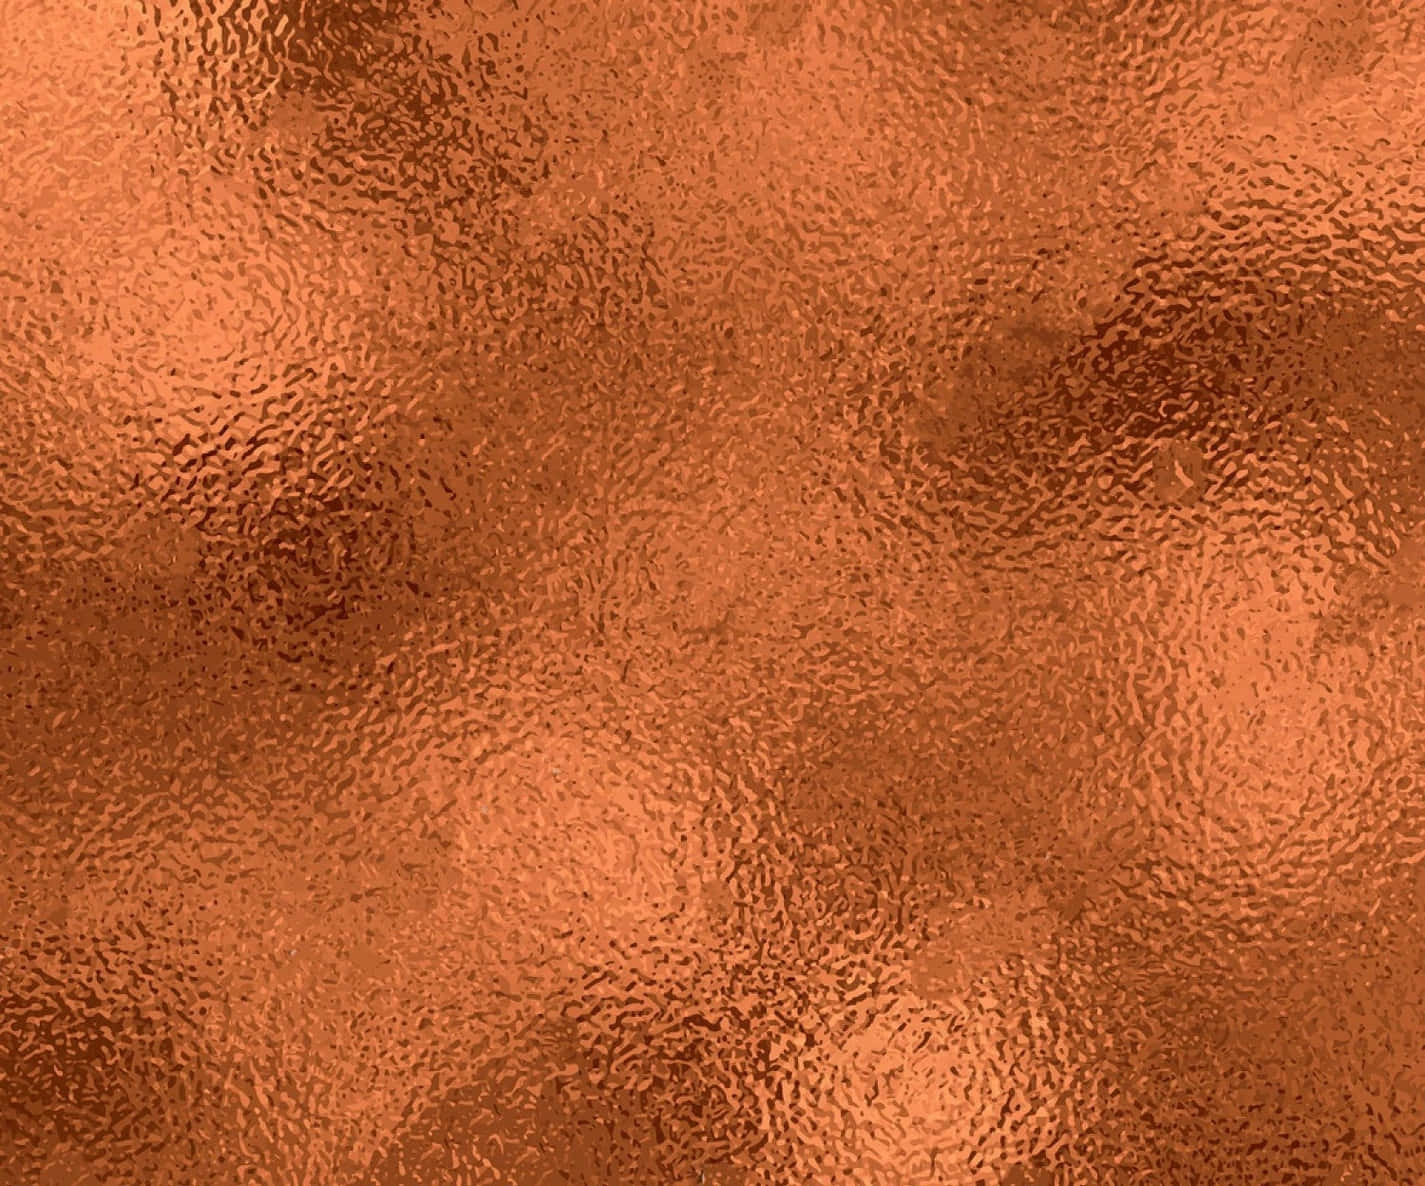 Bright background of a bronze material